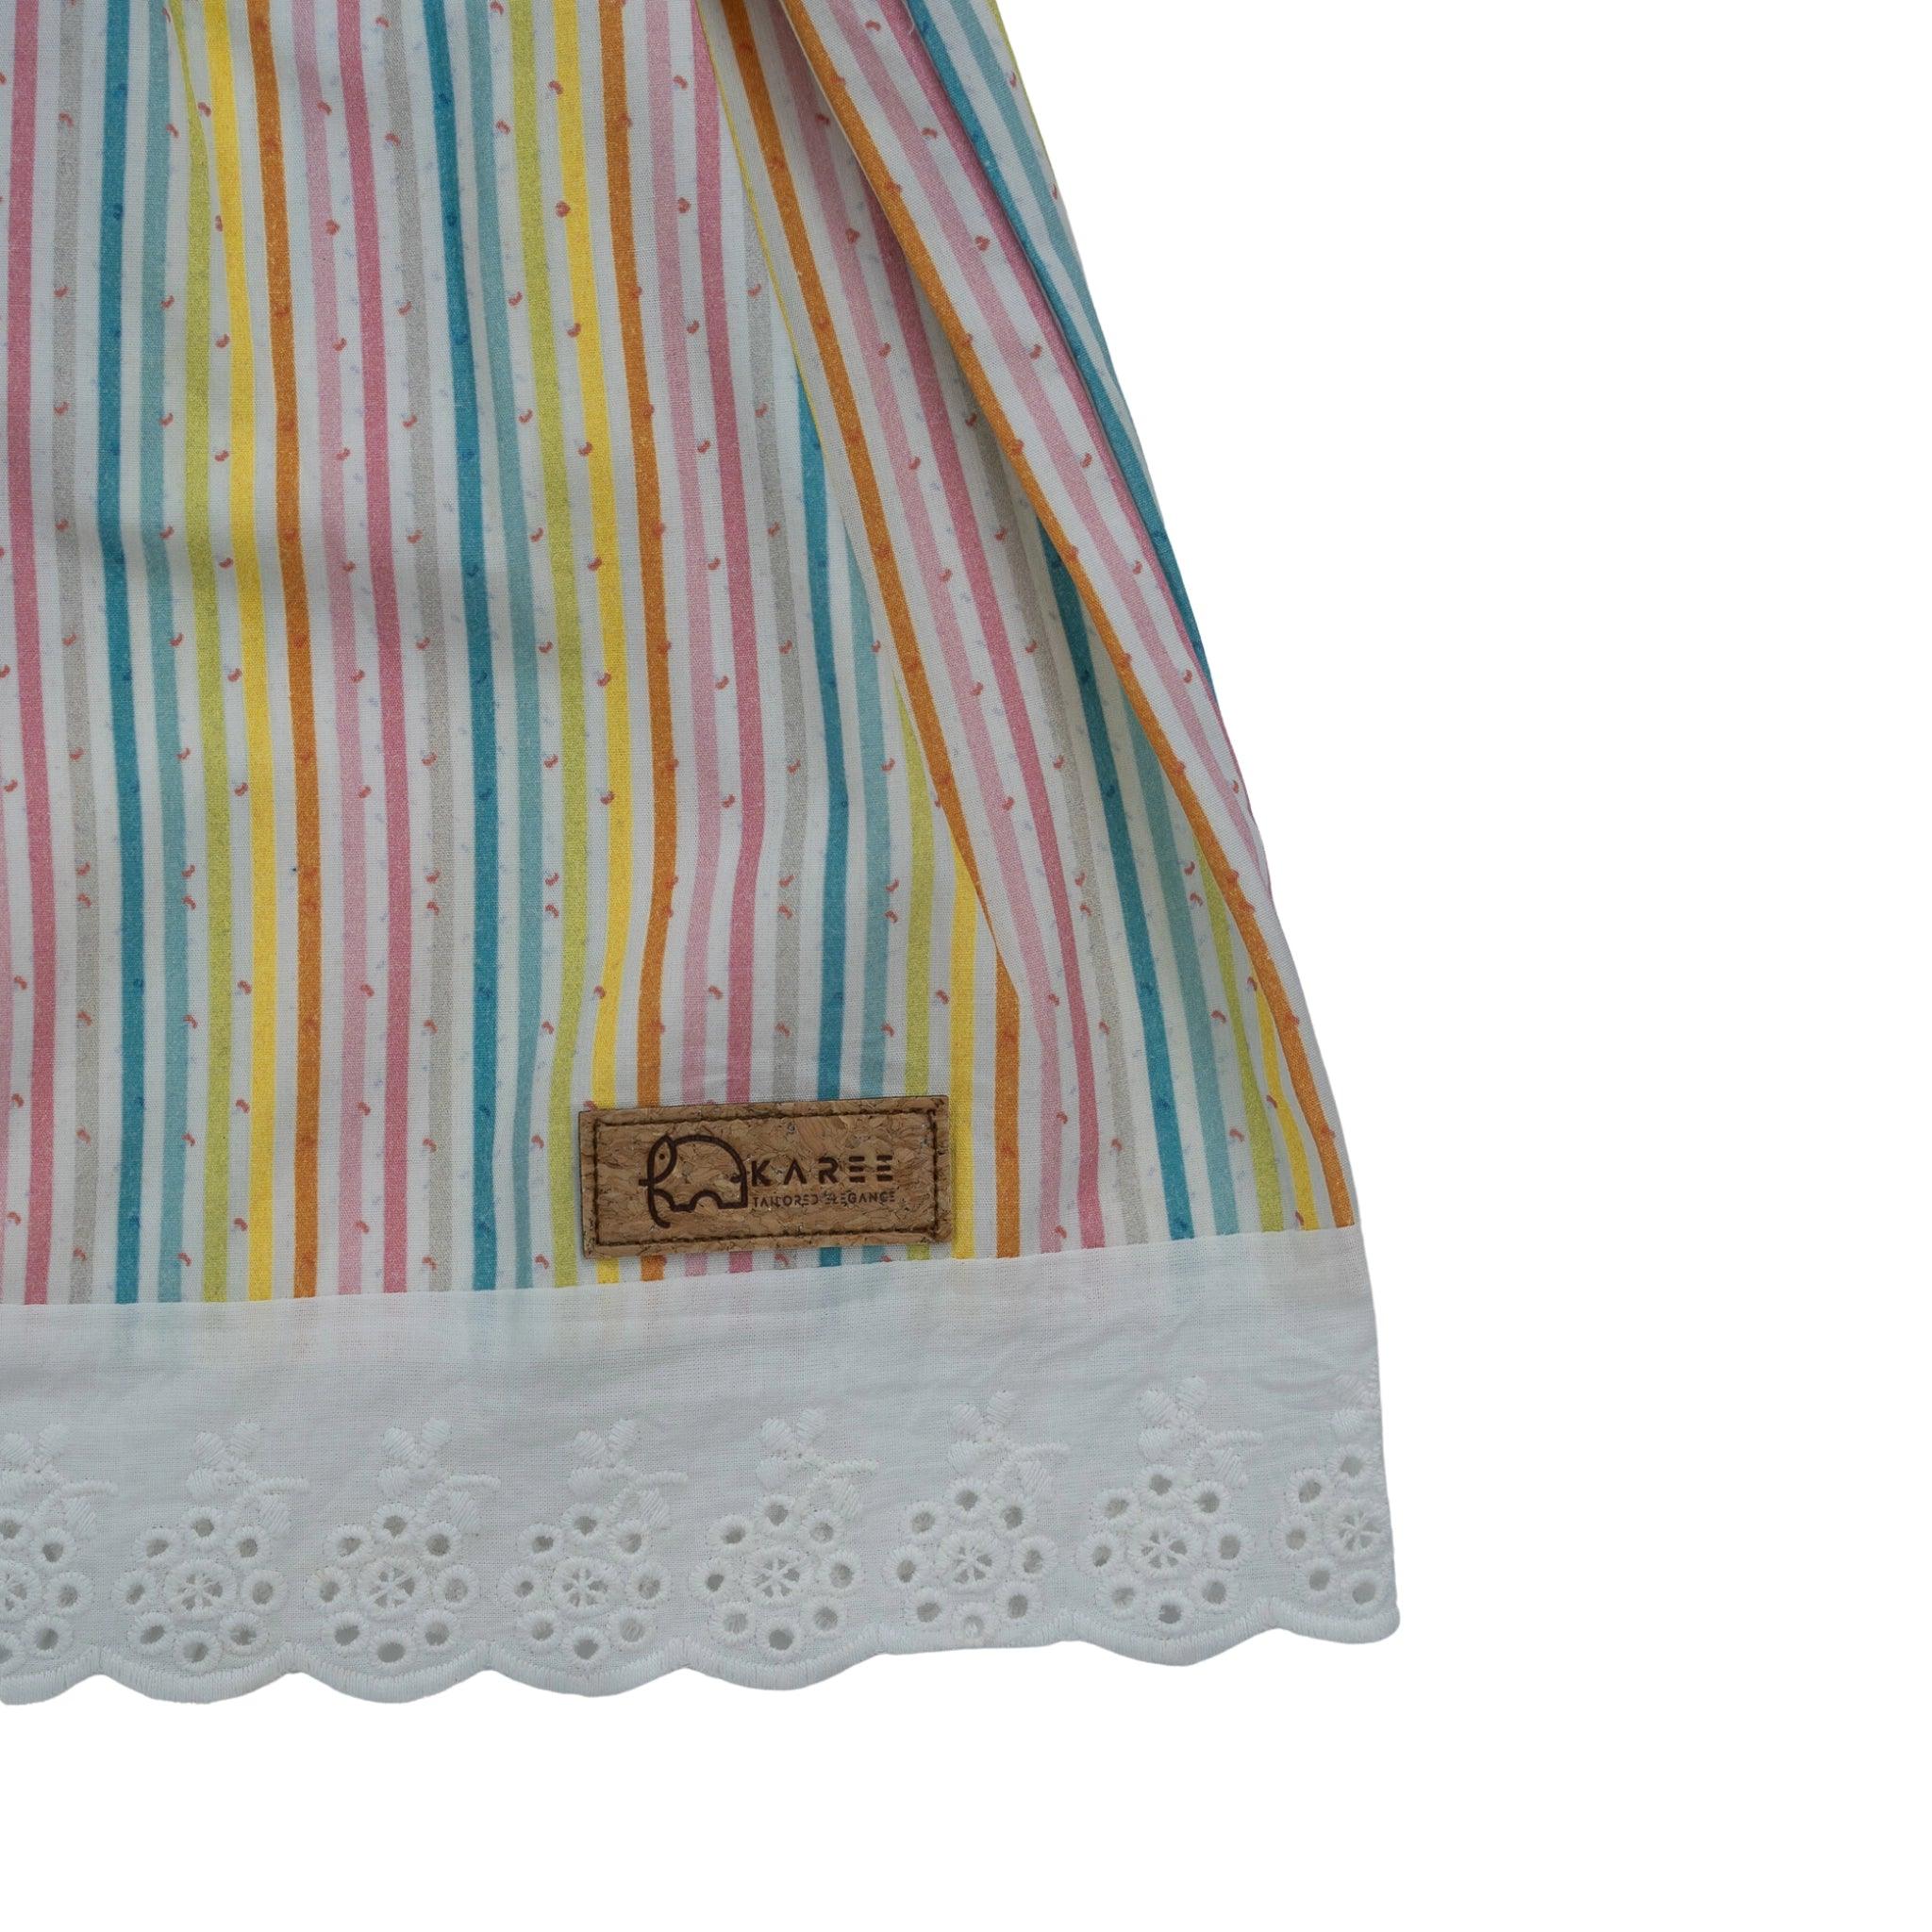 Striped fabric with a wooden Karee tag and a white lace trim on a white cotton background.